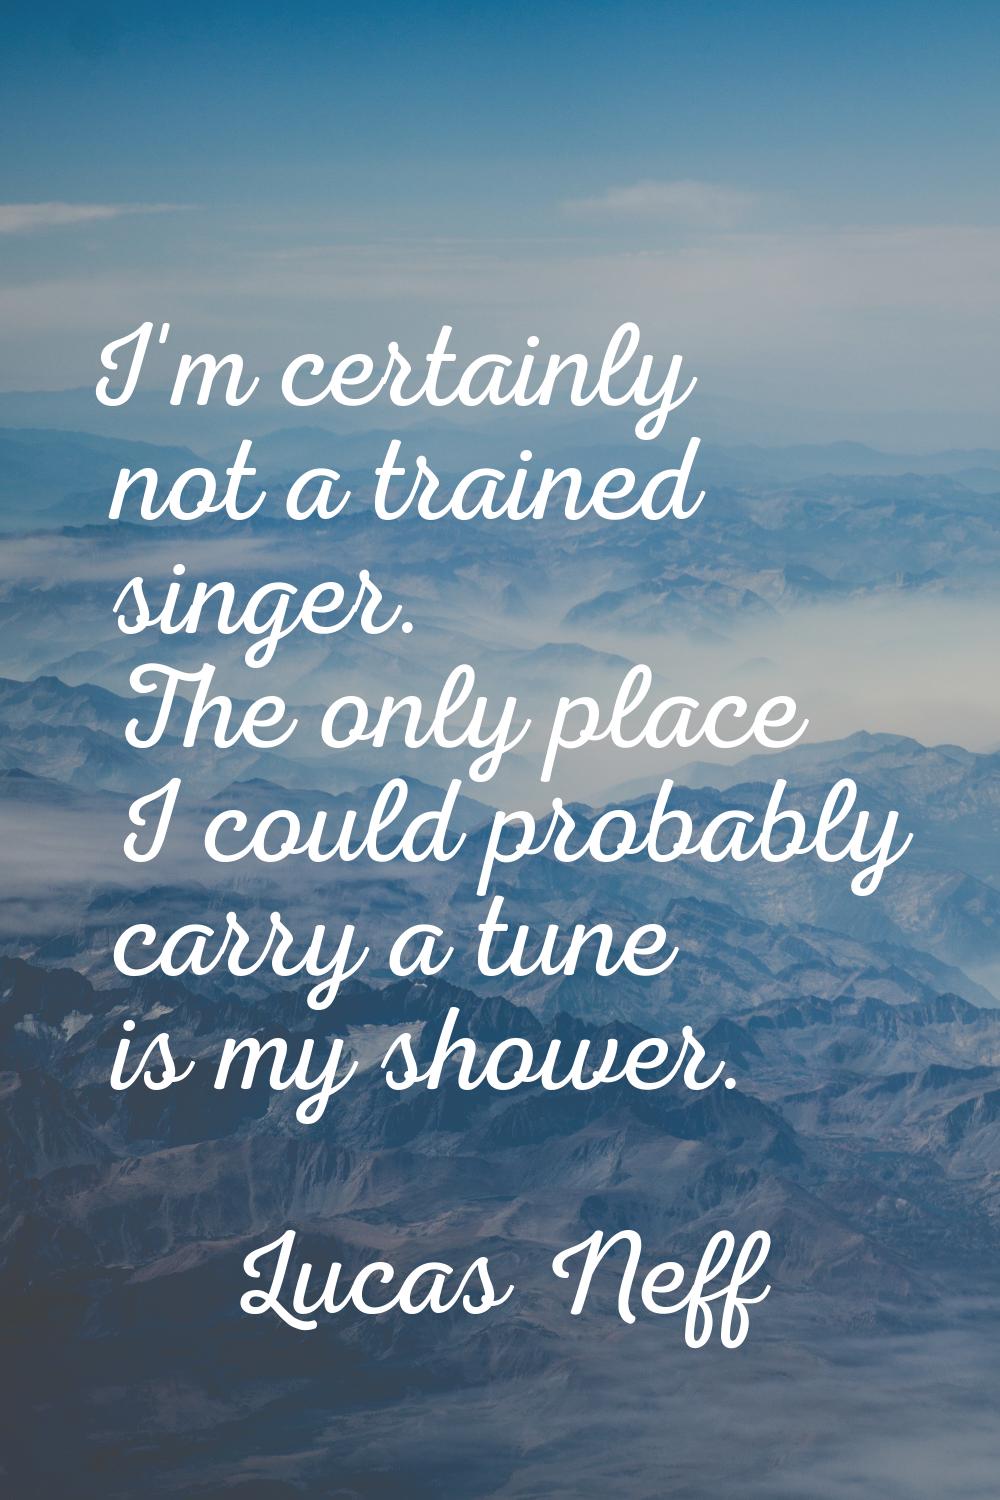 I'm certainly not a trained singer. The only place I could probably carry a tune is my shower.